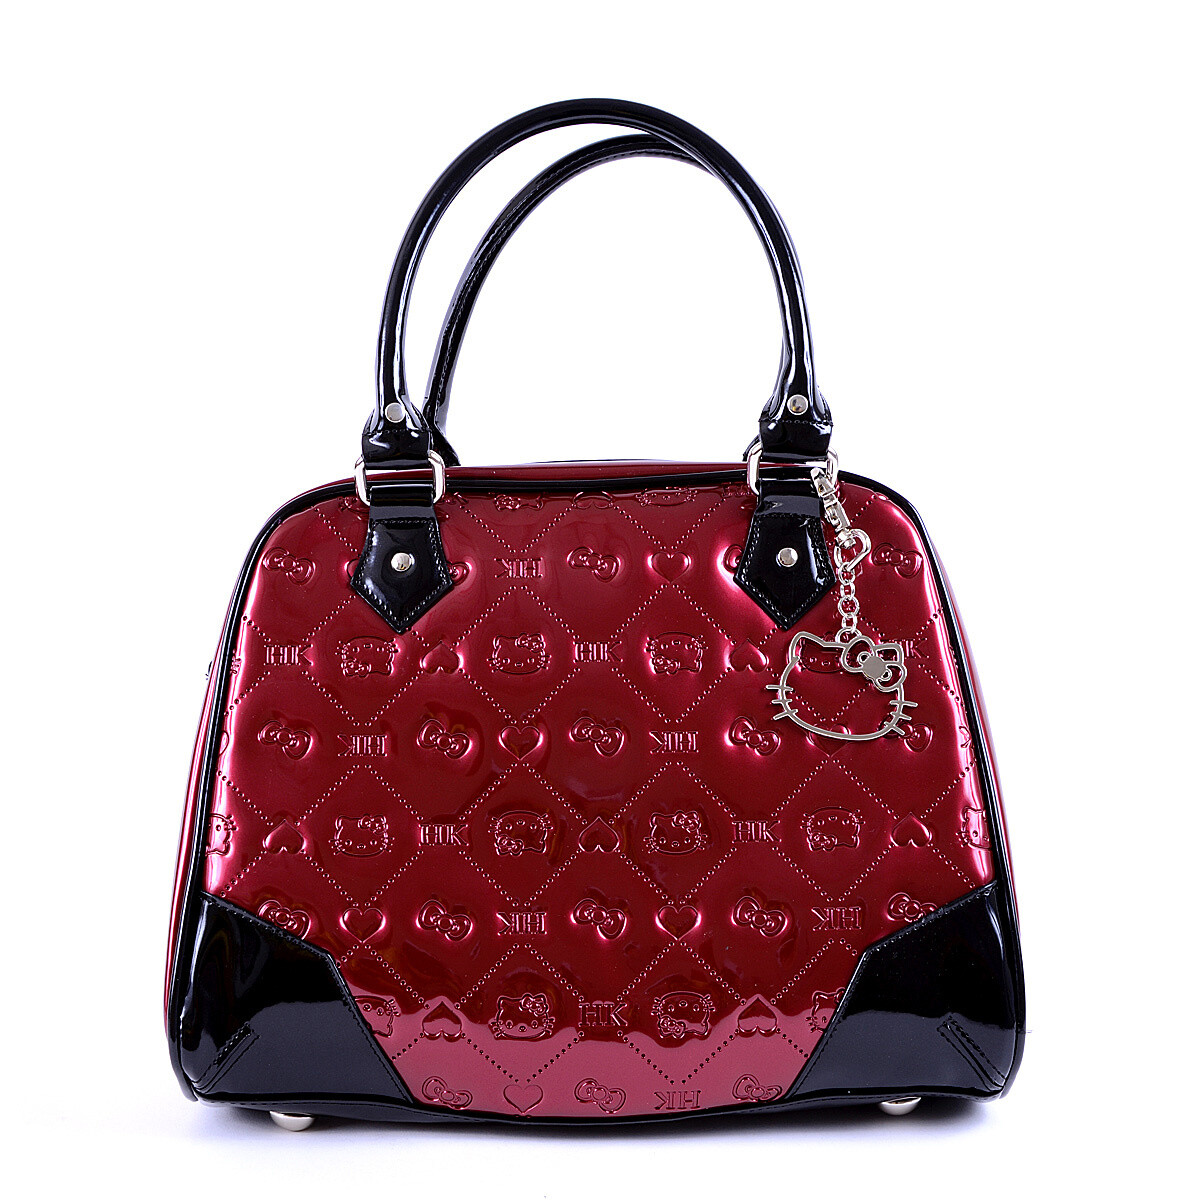 Loungefly - Hello Kitty Red Patent Embossed Bag  Hello kitty bag, Hello  kitty handbags, Hello kitty items